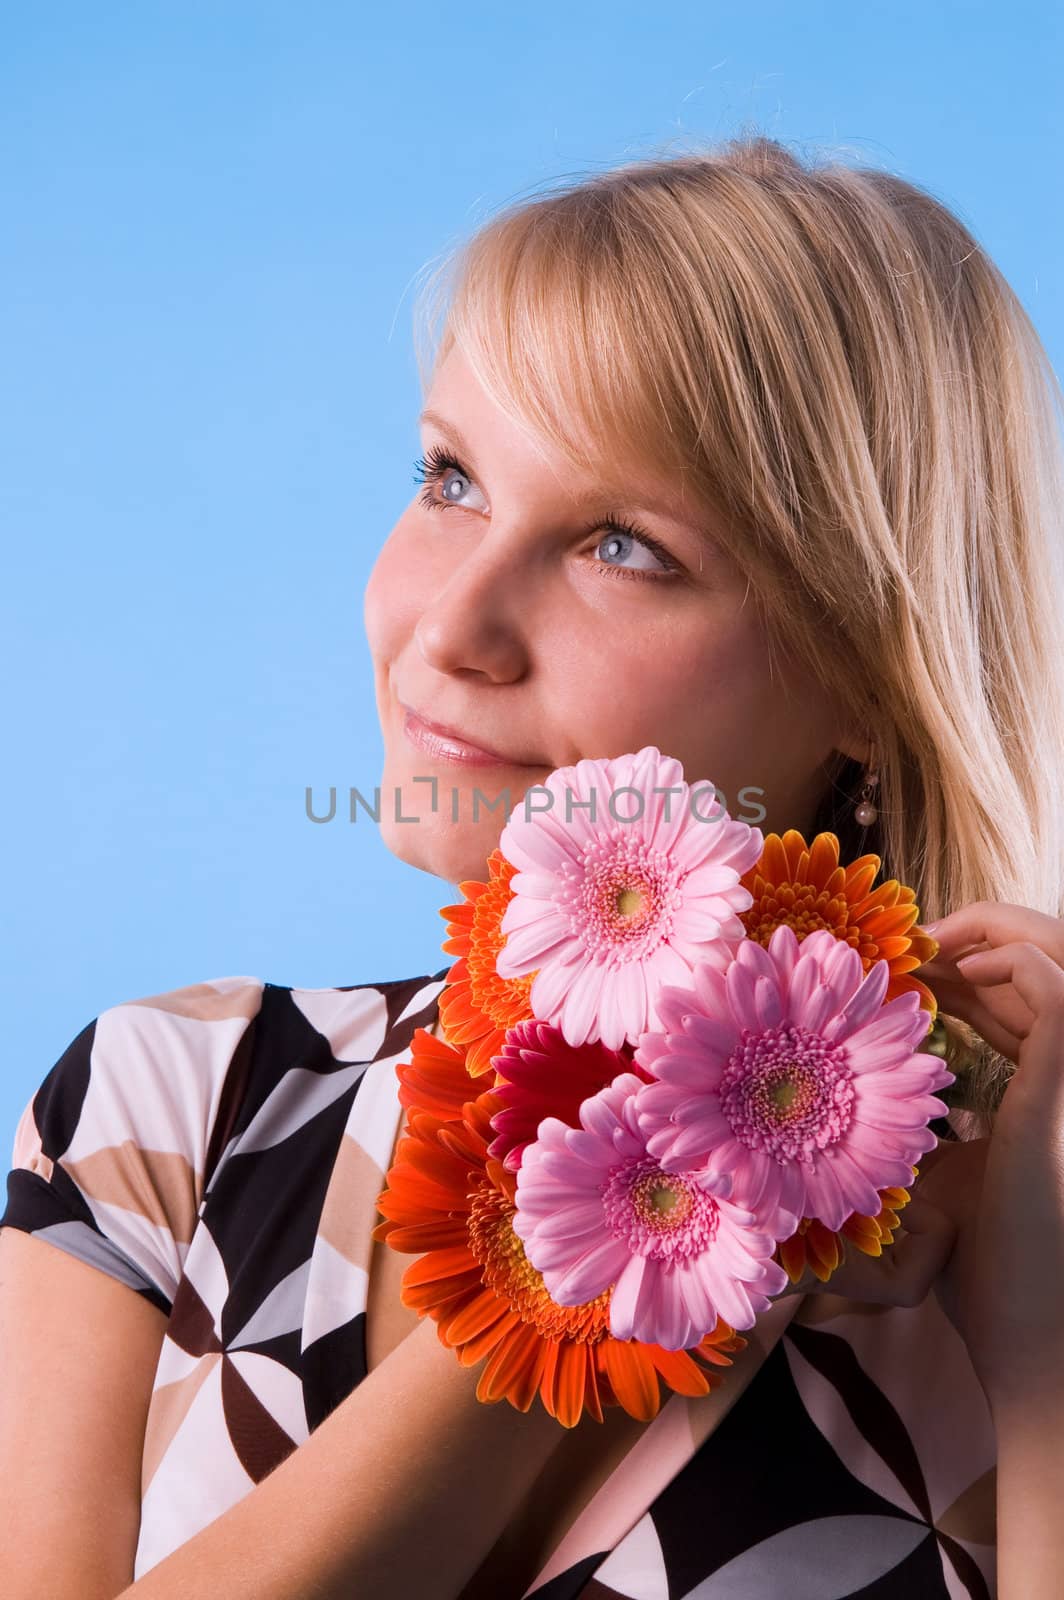 The girl and flowers by andyphoto